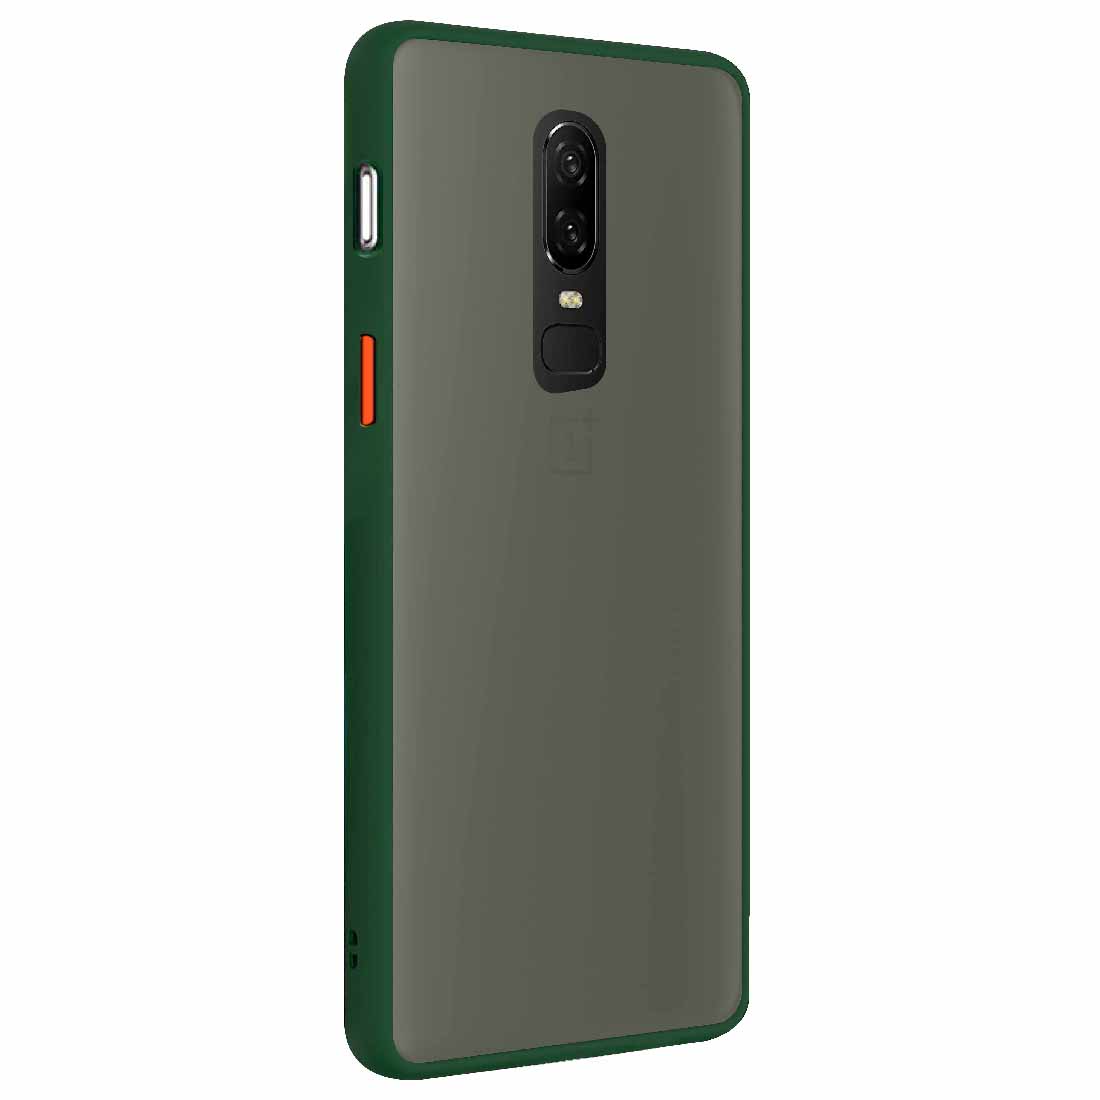 Smoke Back Case Cover for OnePlus 6